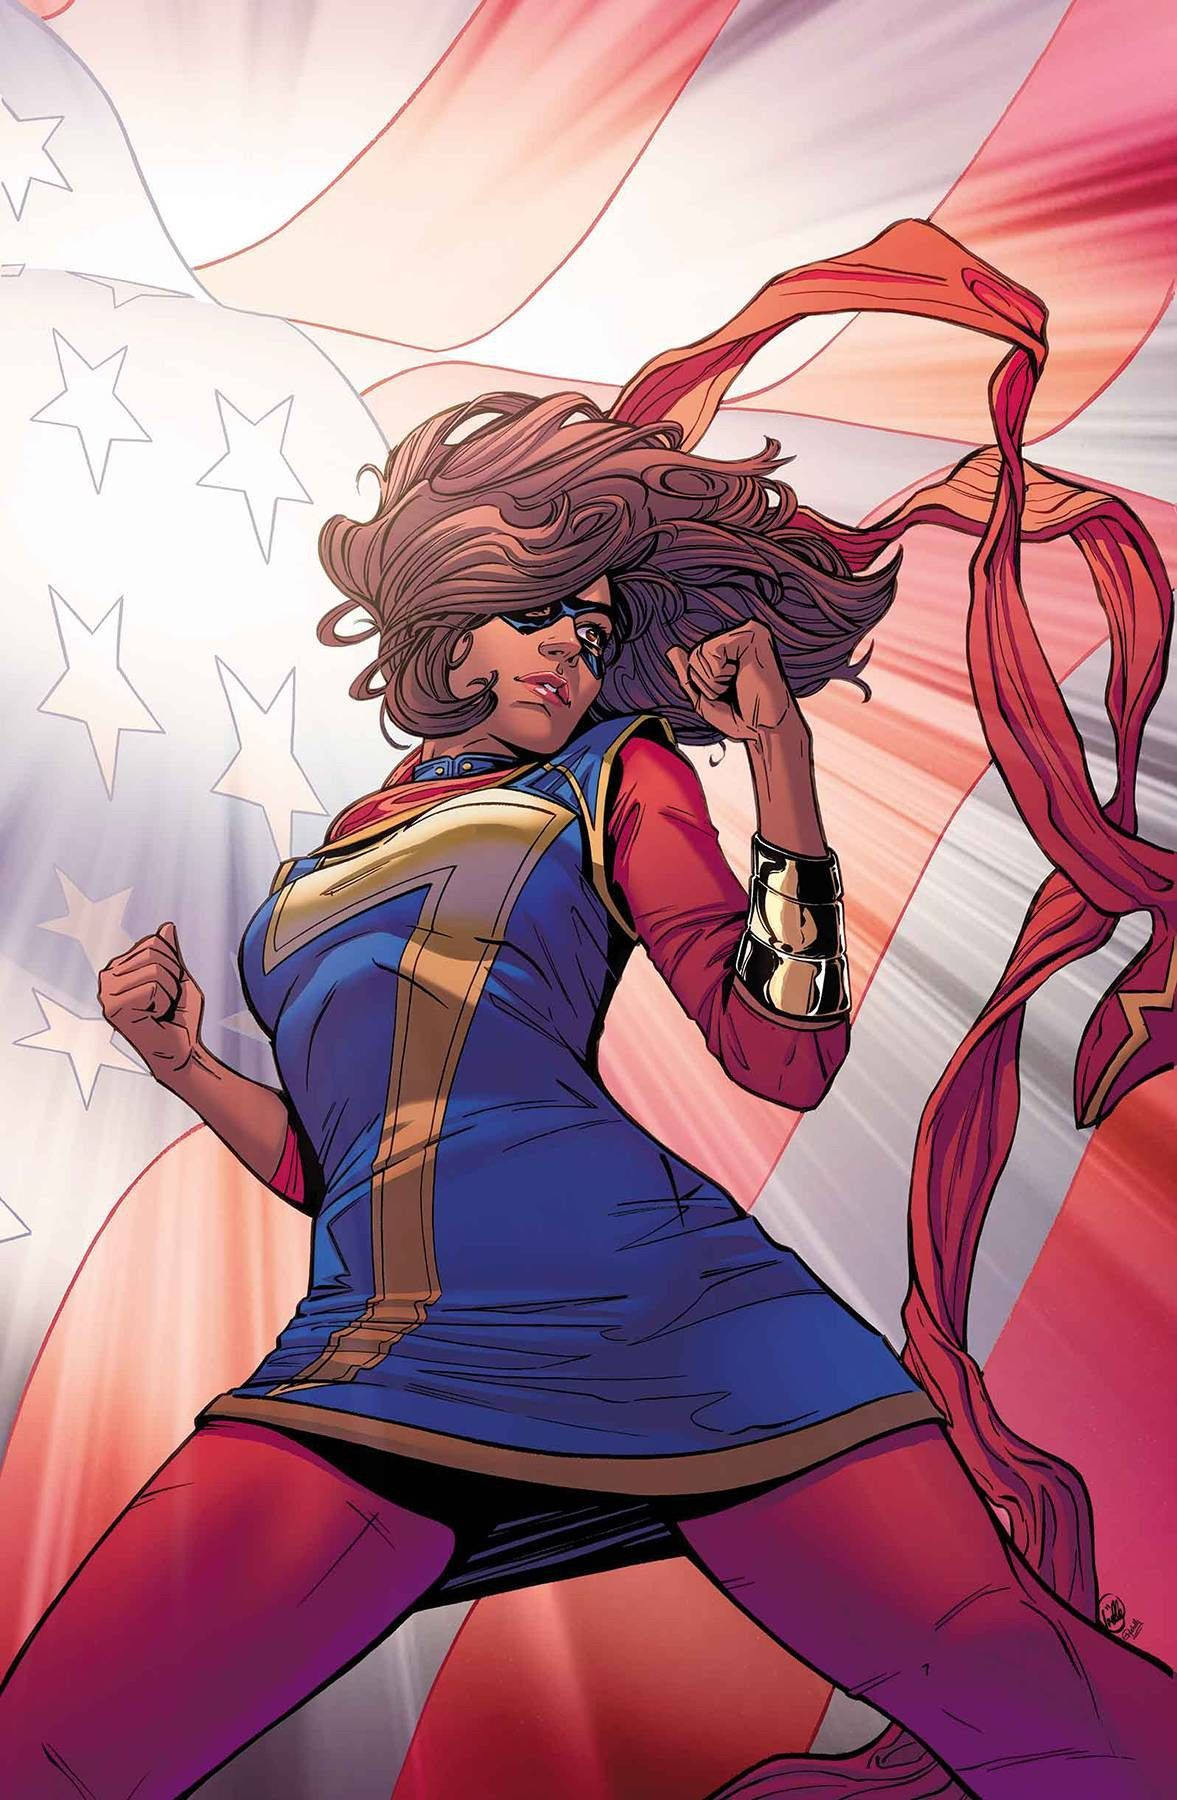 Free Ms Marvel Wallpaper Downloads, [100+] Ms Marvel Wallpapers for FREE |  